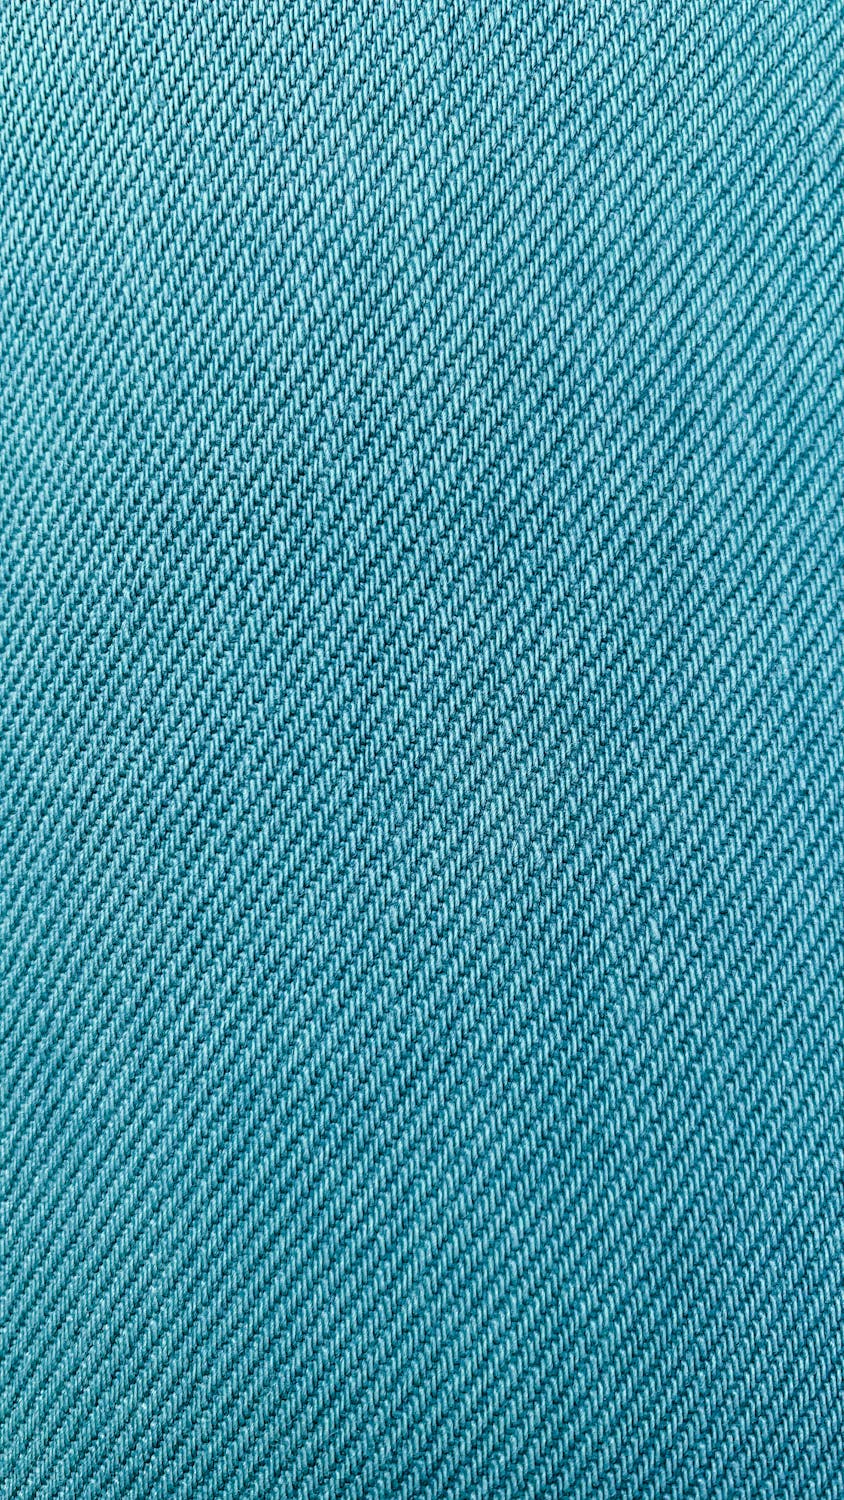 Blue Cloth in Close-Up Photography · Free Stock Photo